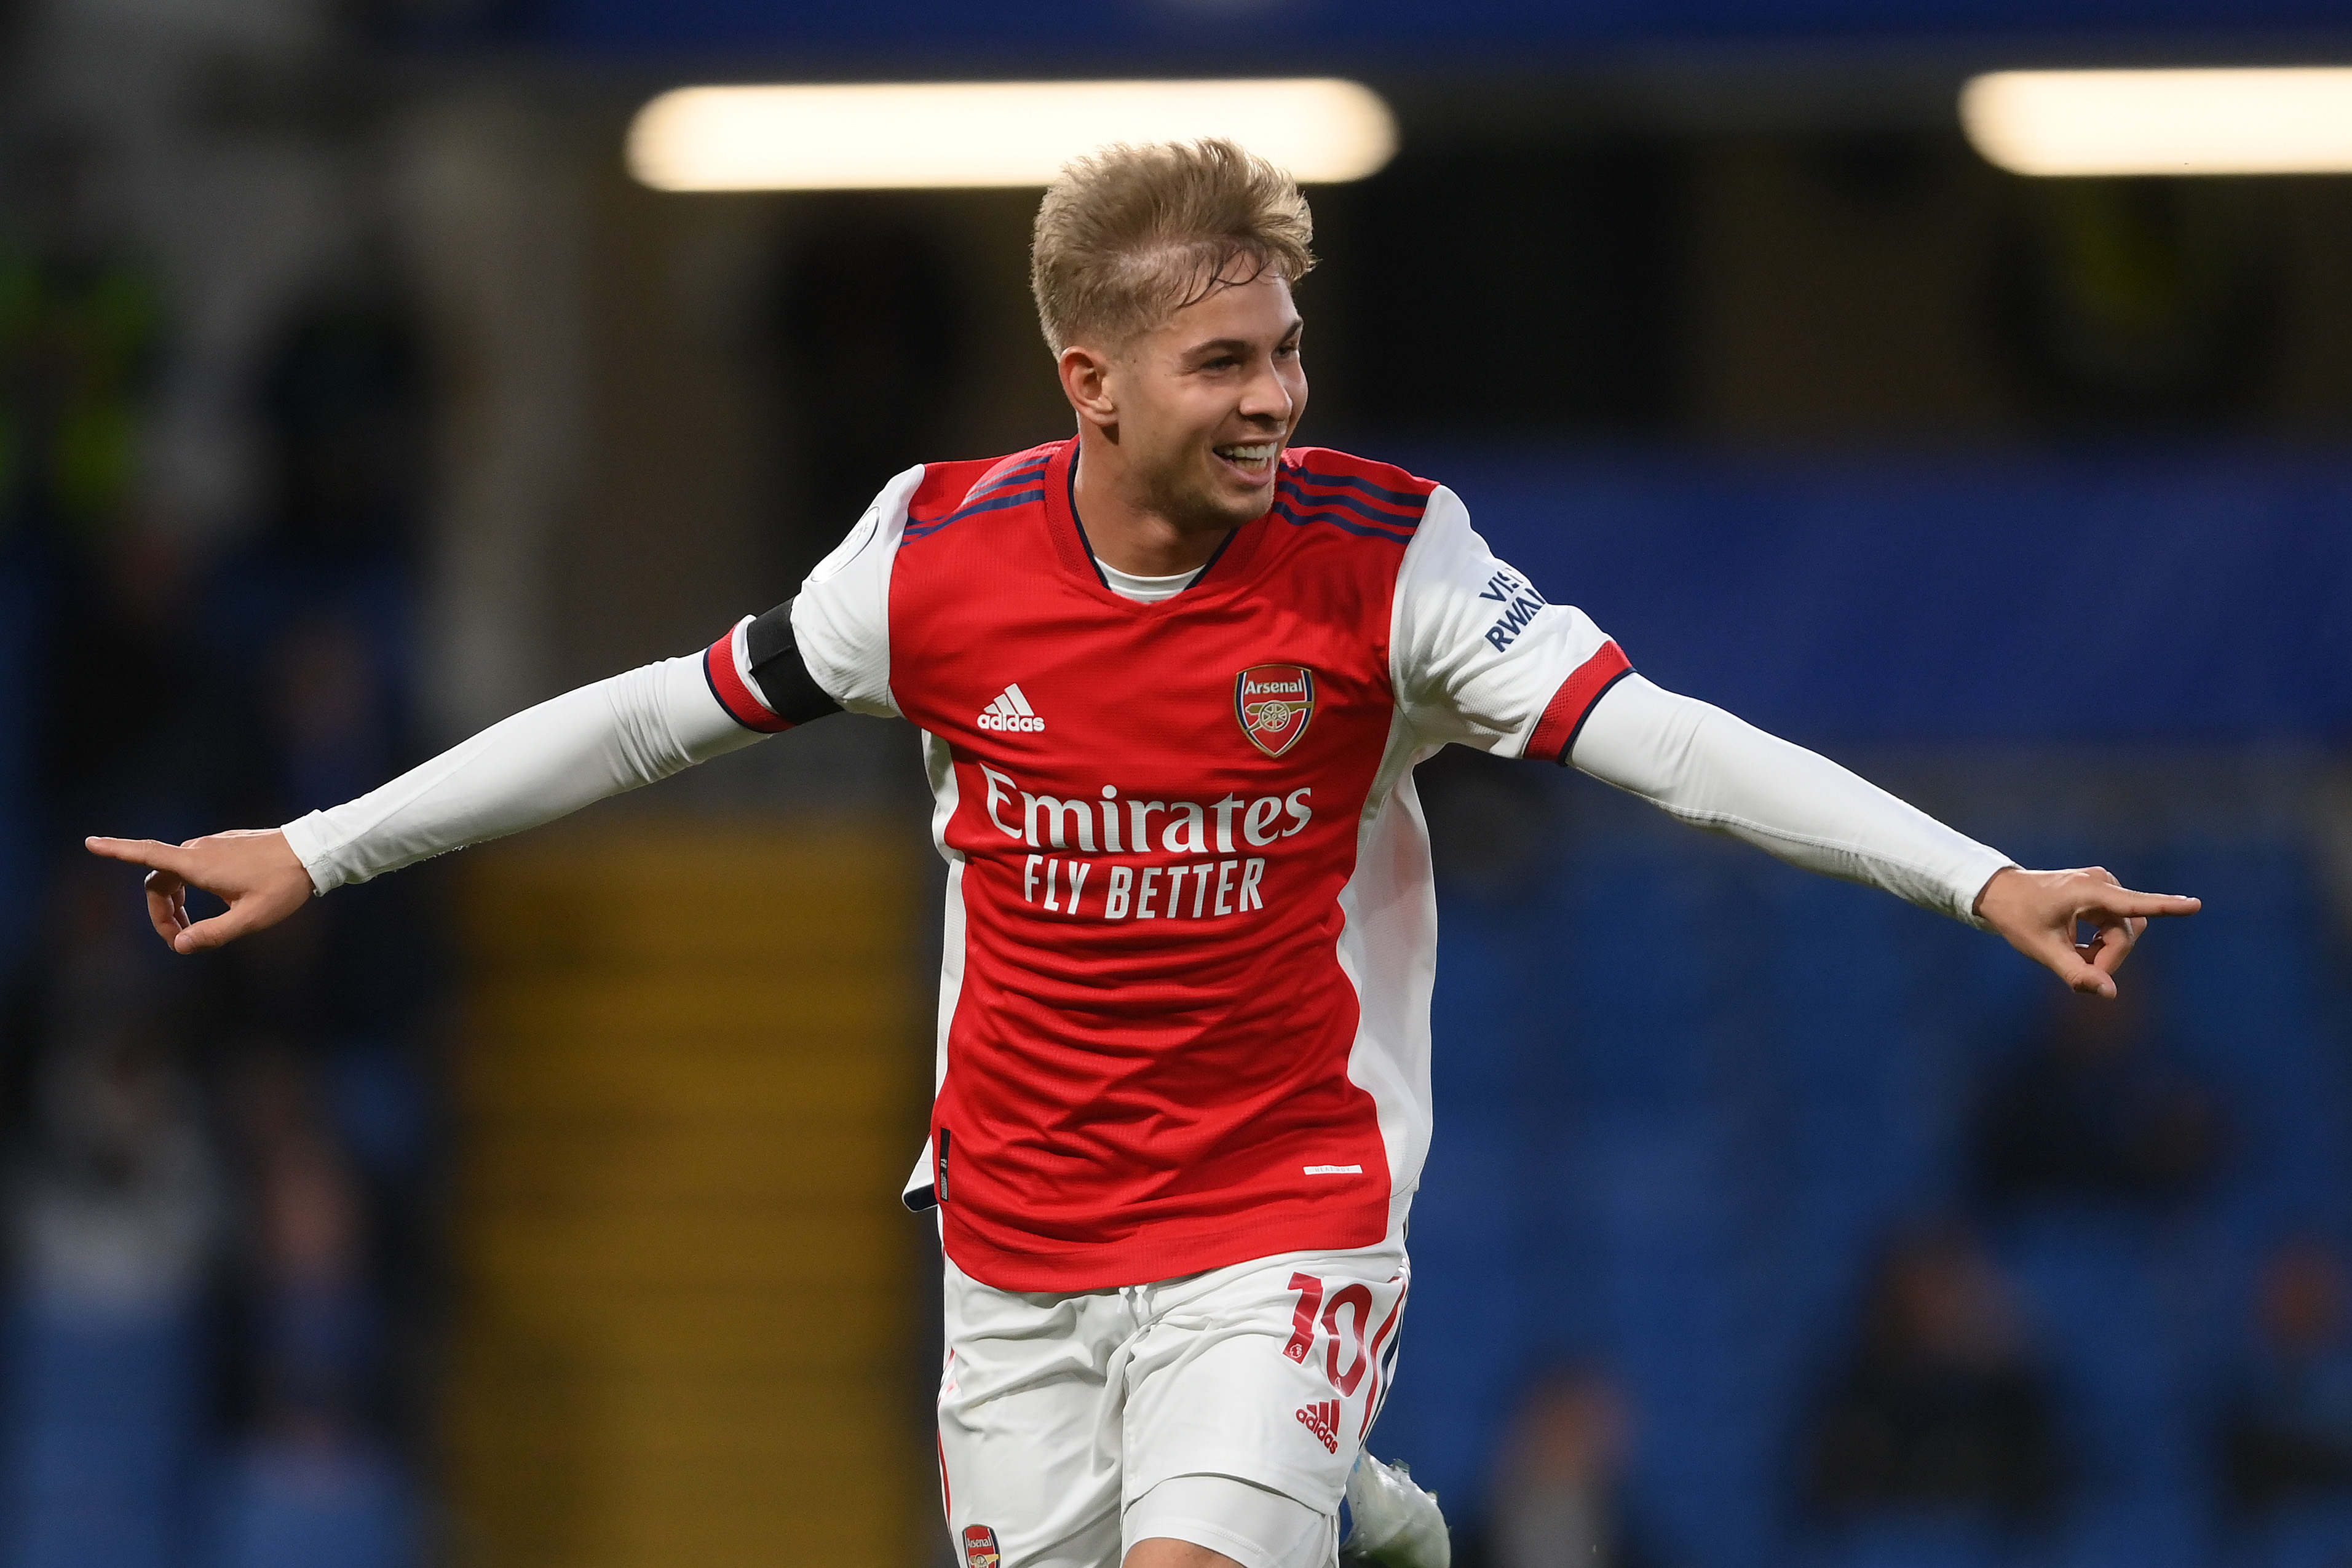 ‘I didn’t actually realise’ – Smith Rowe surprised by summer signing